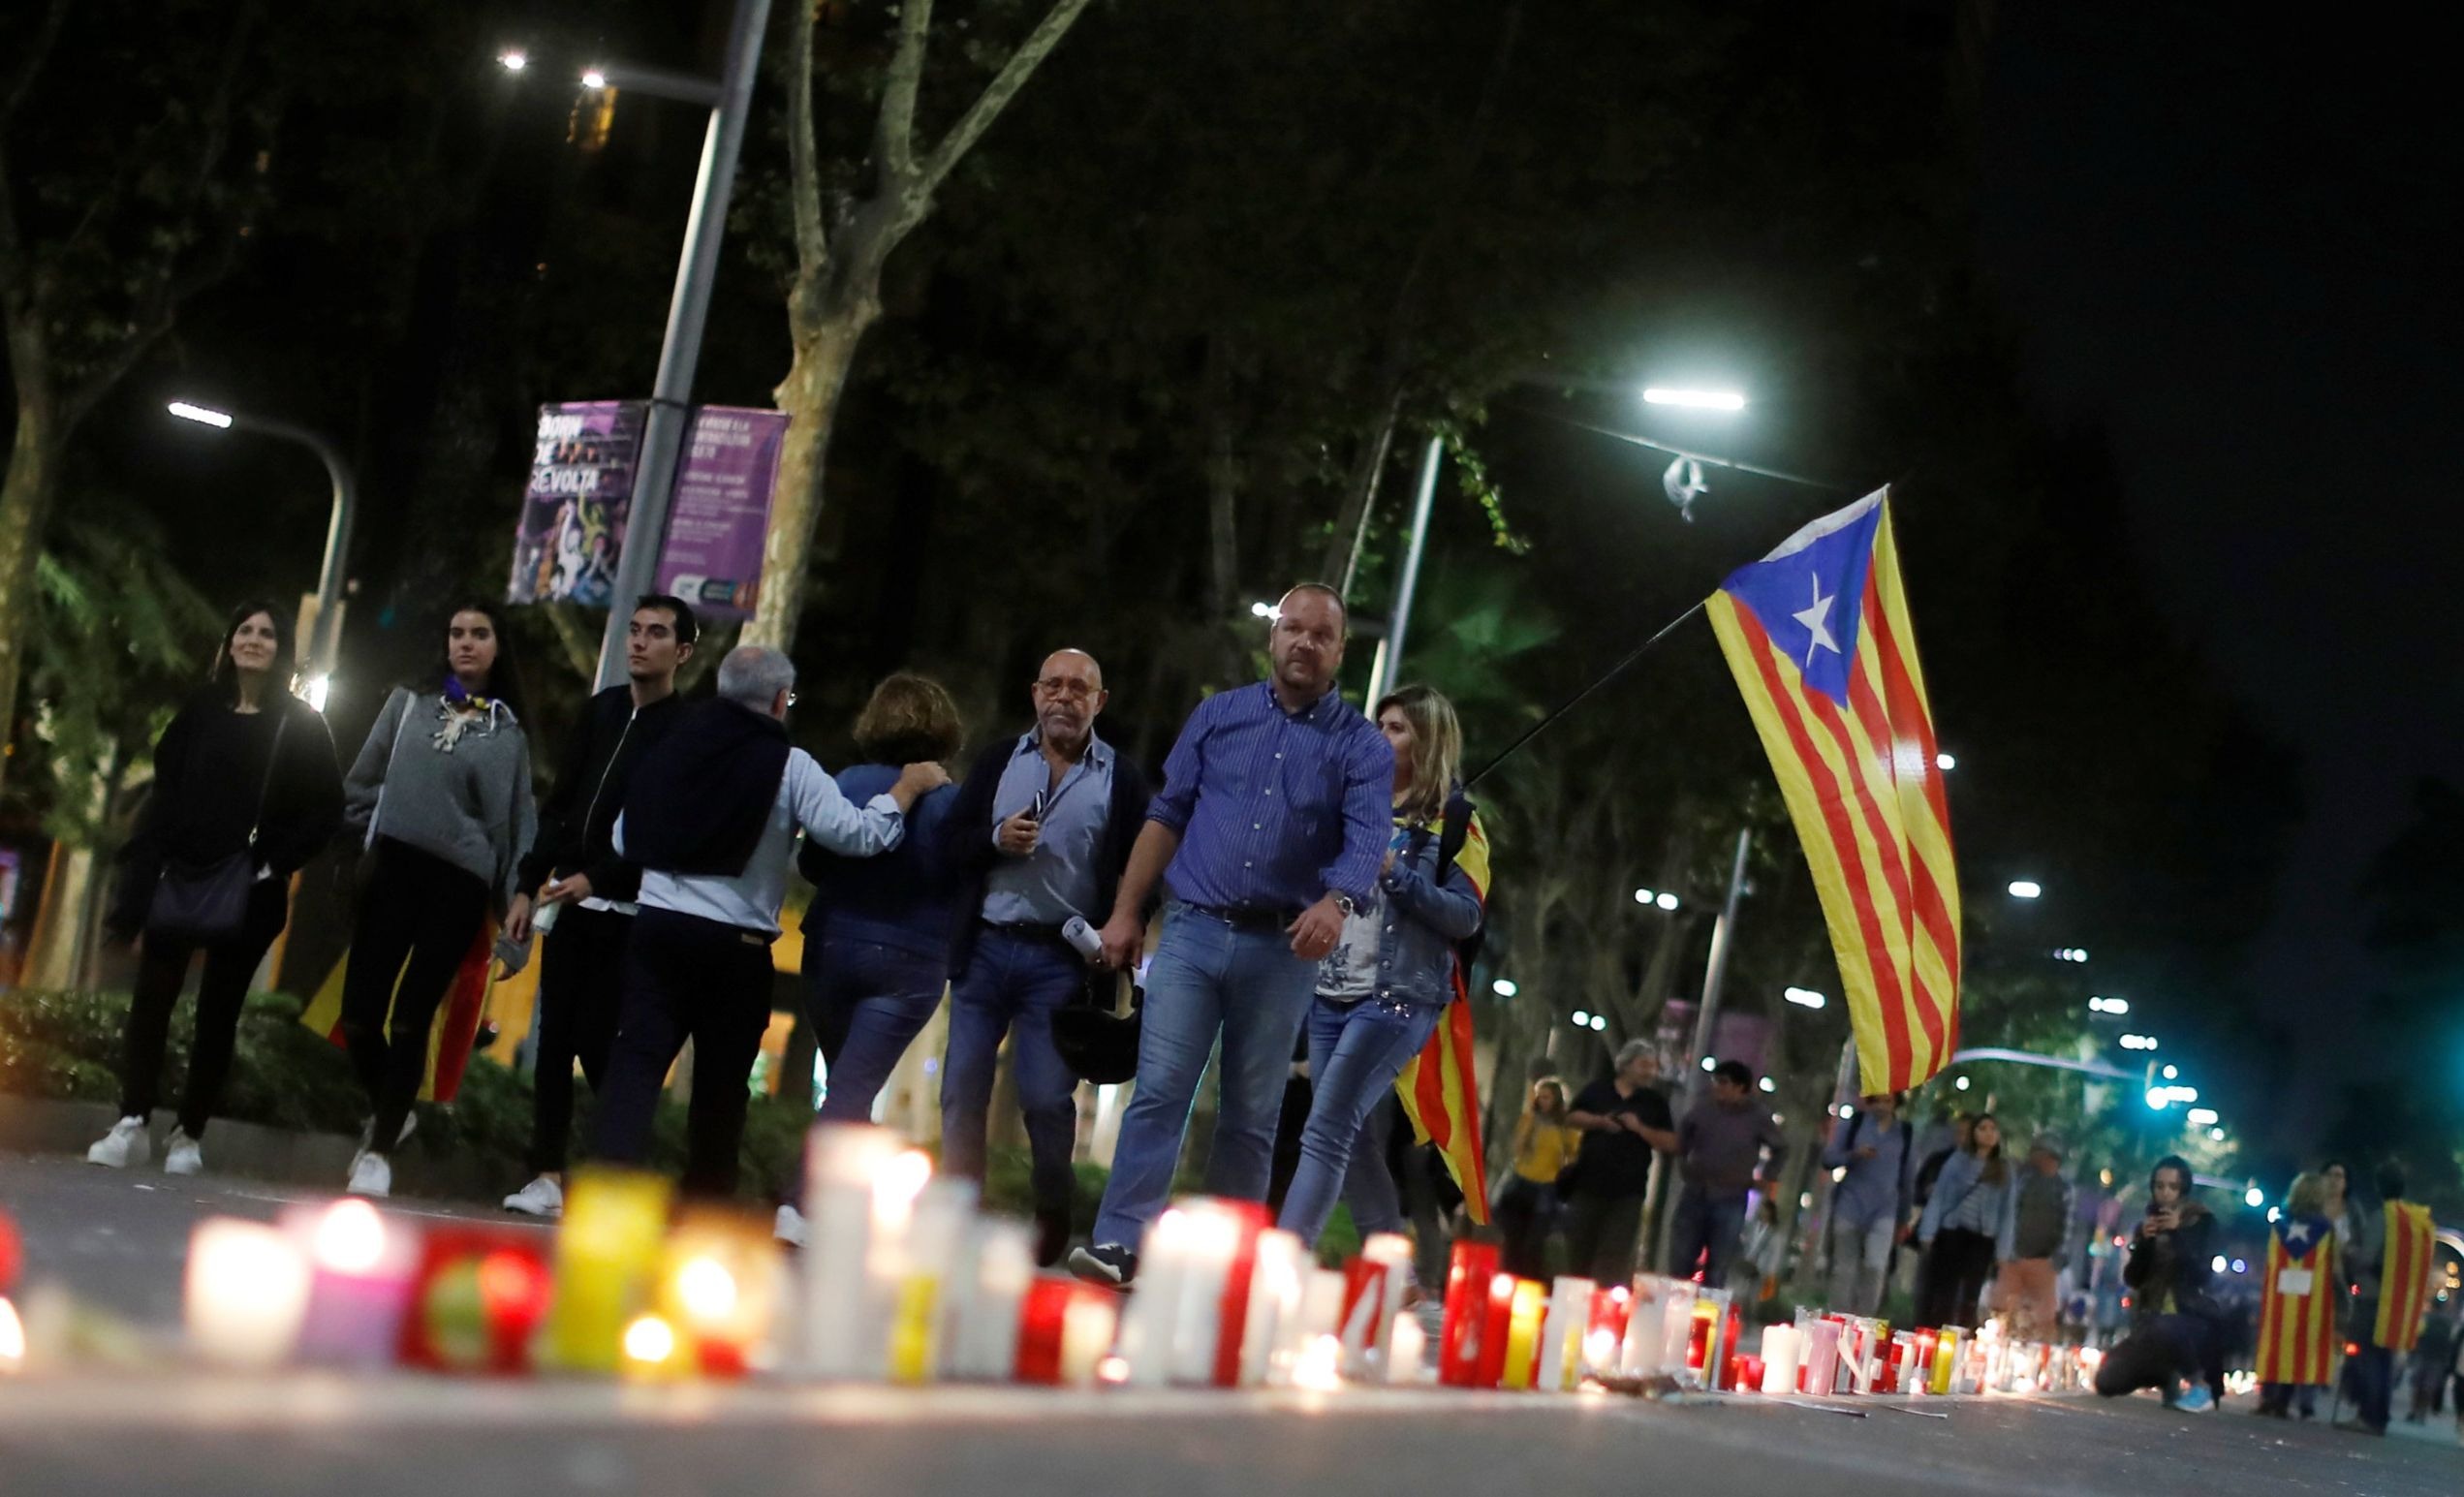 People walk with an Estelada (Catalan separatist flag) next to candles during a protest against the imprisonment of leaders of two of the largest Catalan separatist organizations who were jailed by Spain's High Court, in Barcelona, Spain, Oct. 17, 2017.